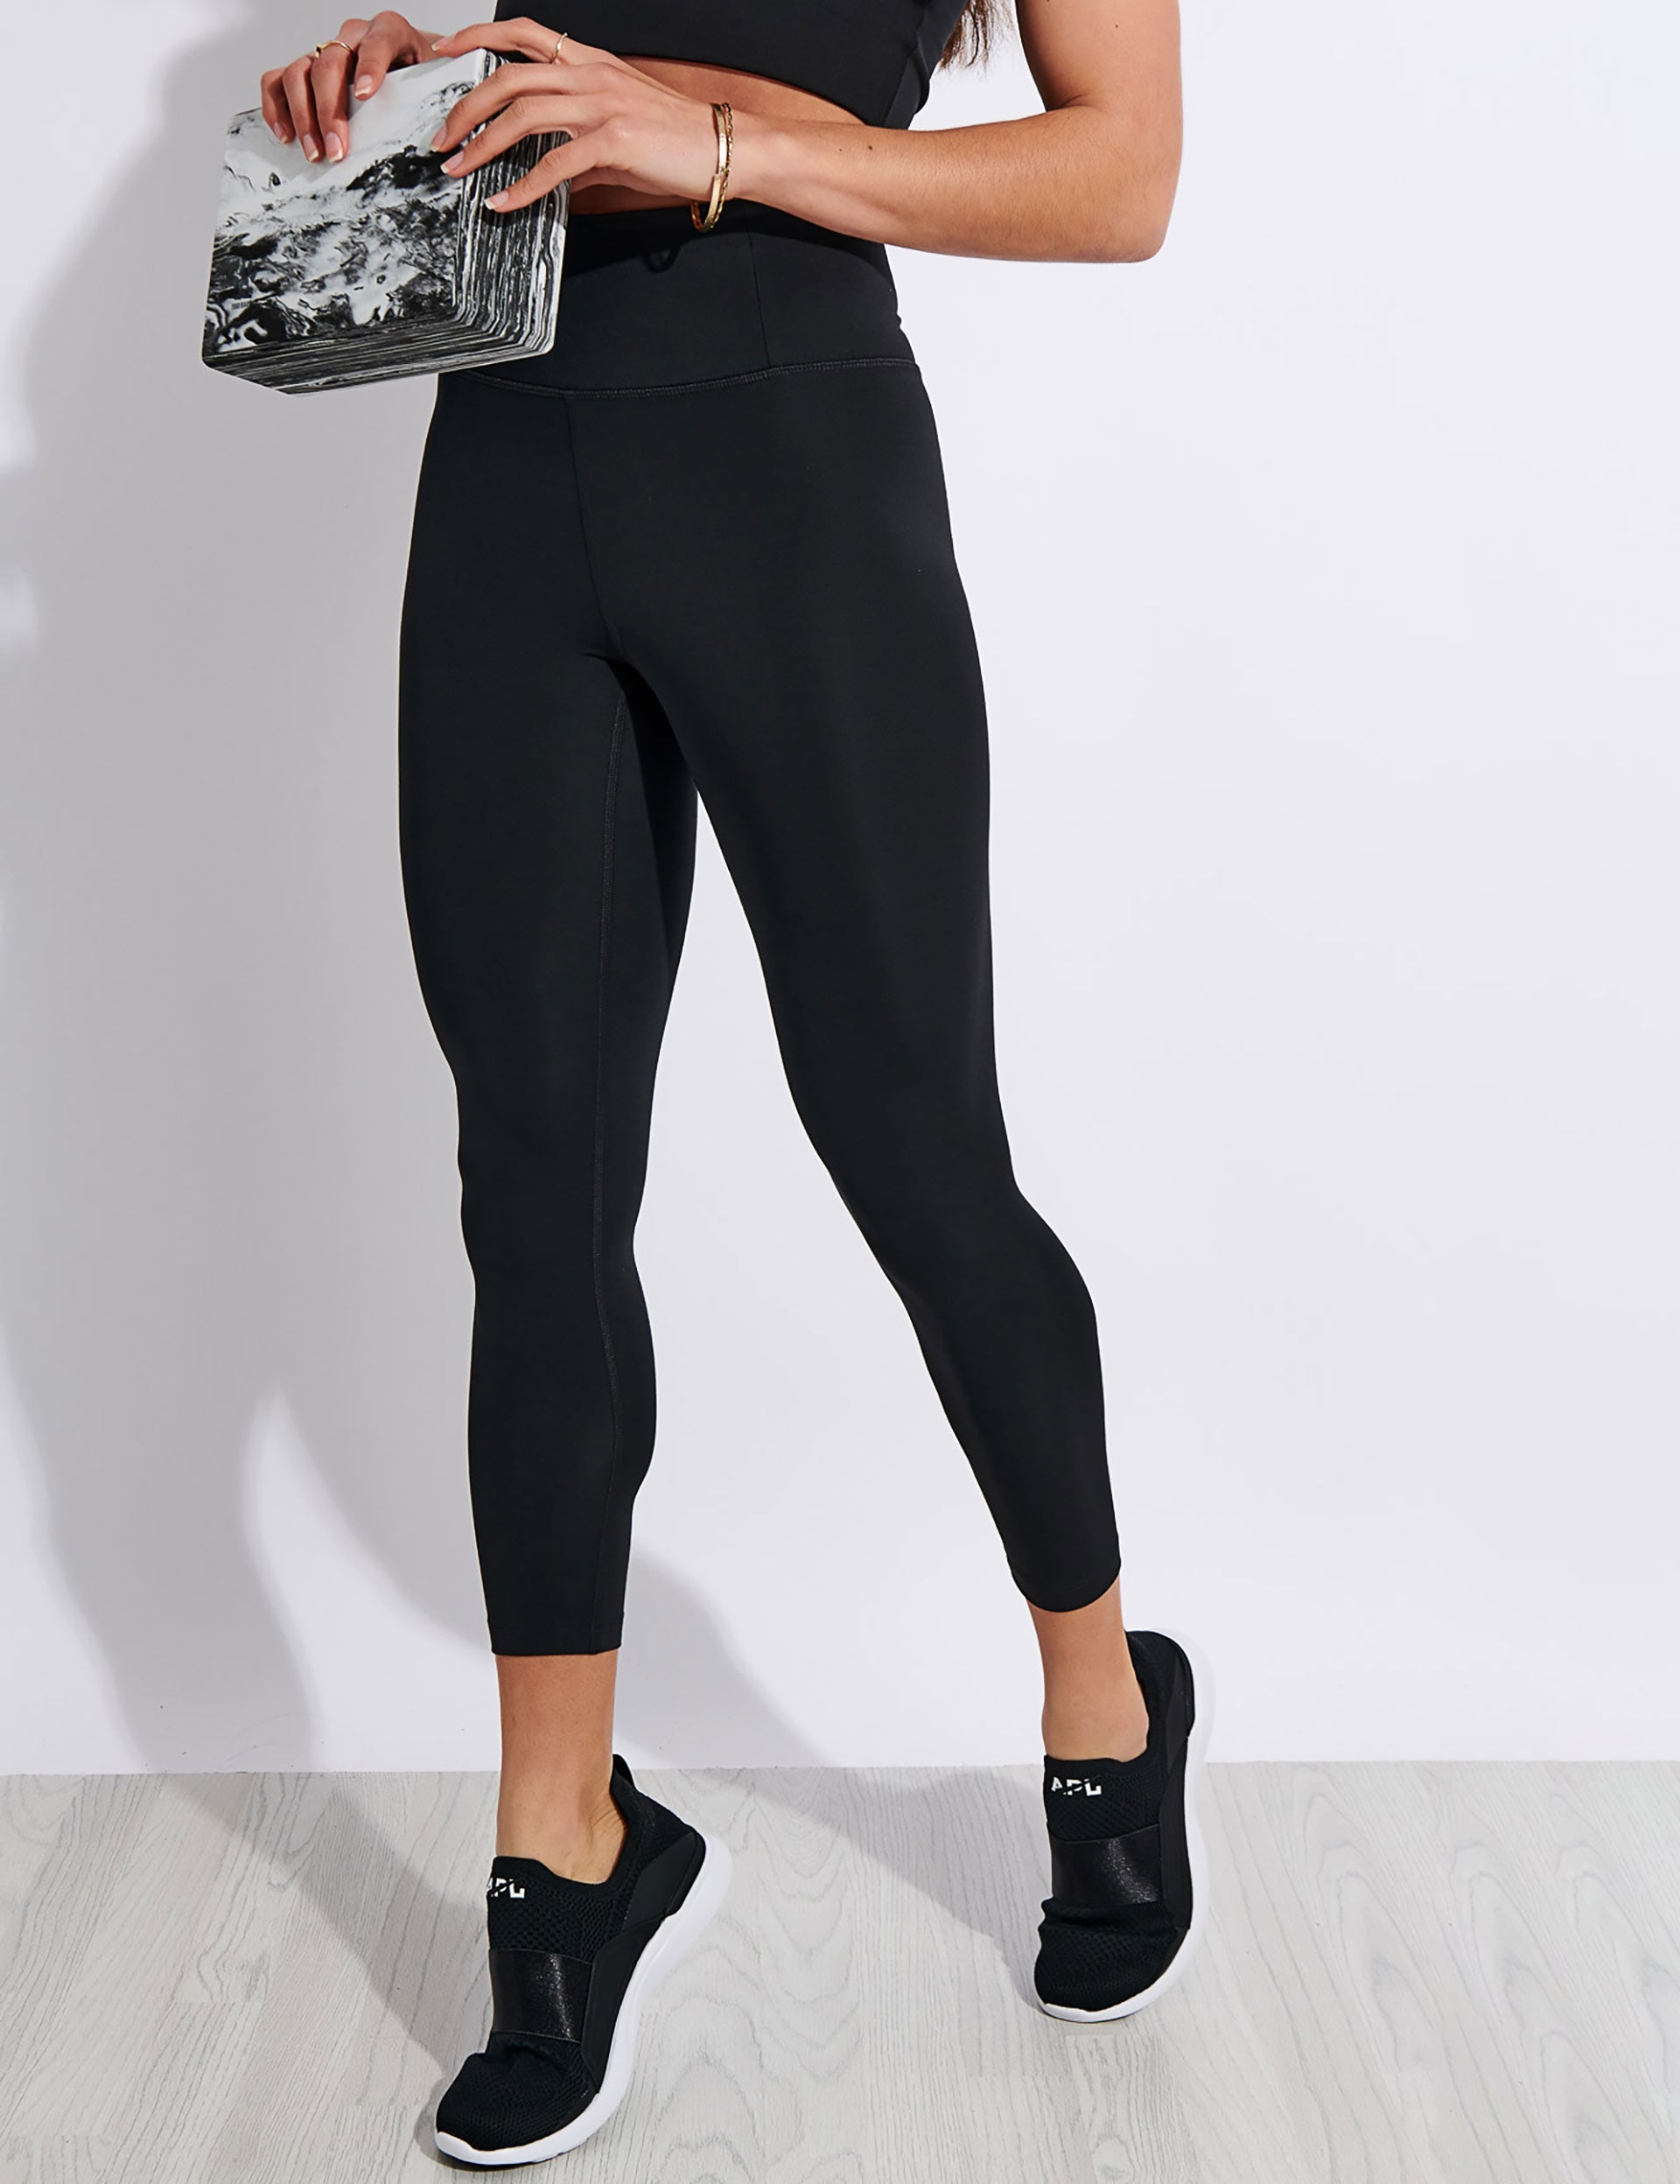 Girlfriend Collective FLOAT High Waisted 7/8 Legging - Blackimage1- The Sports Edit